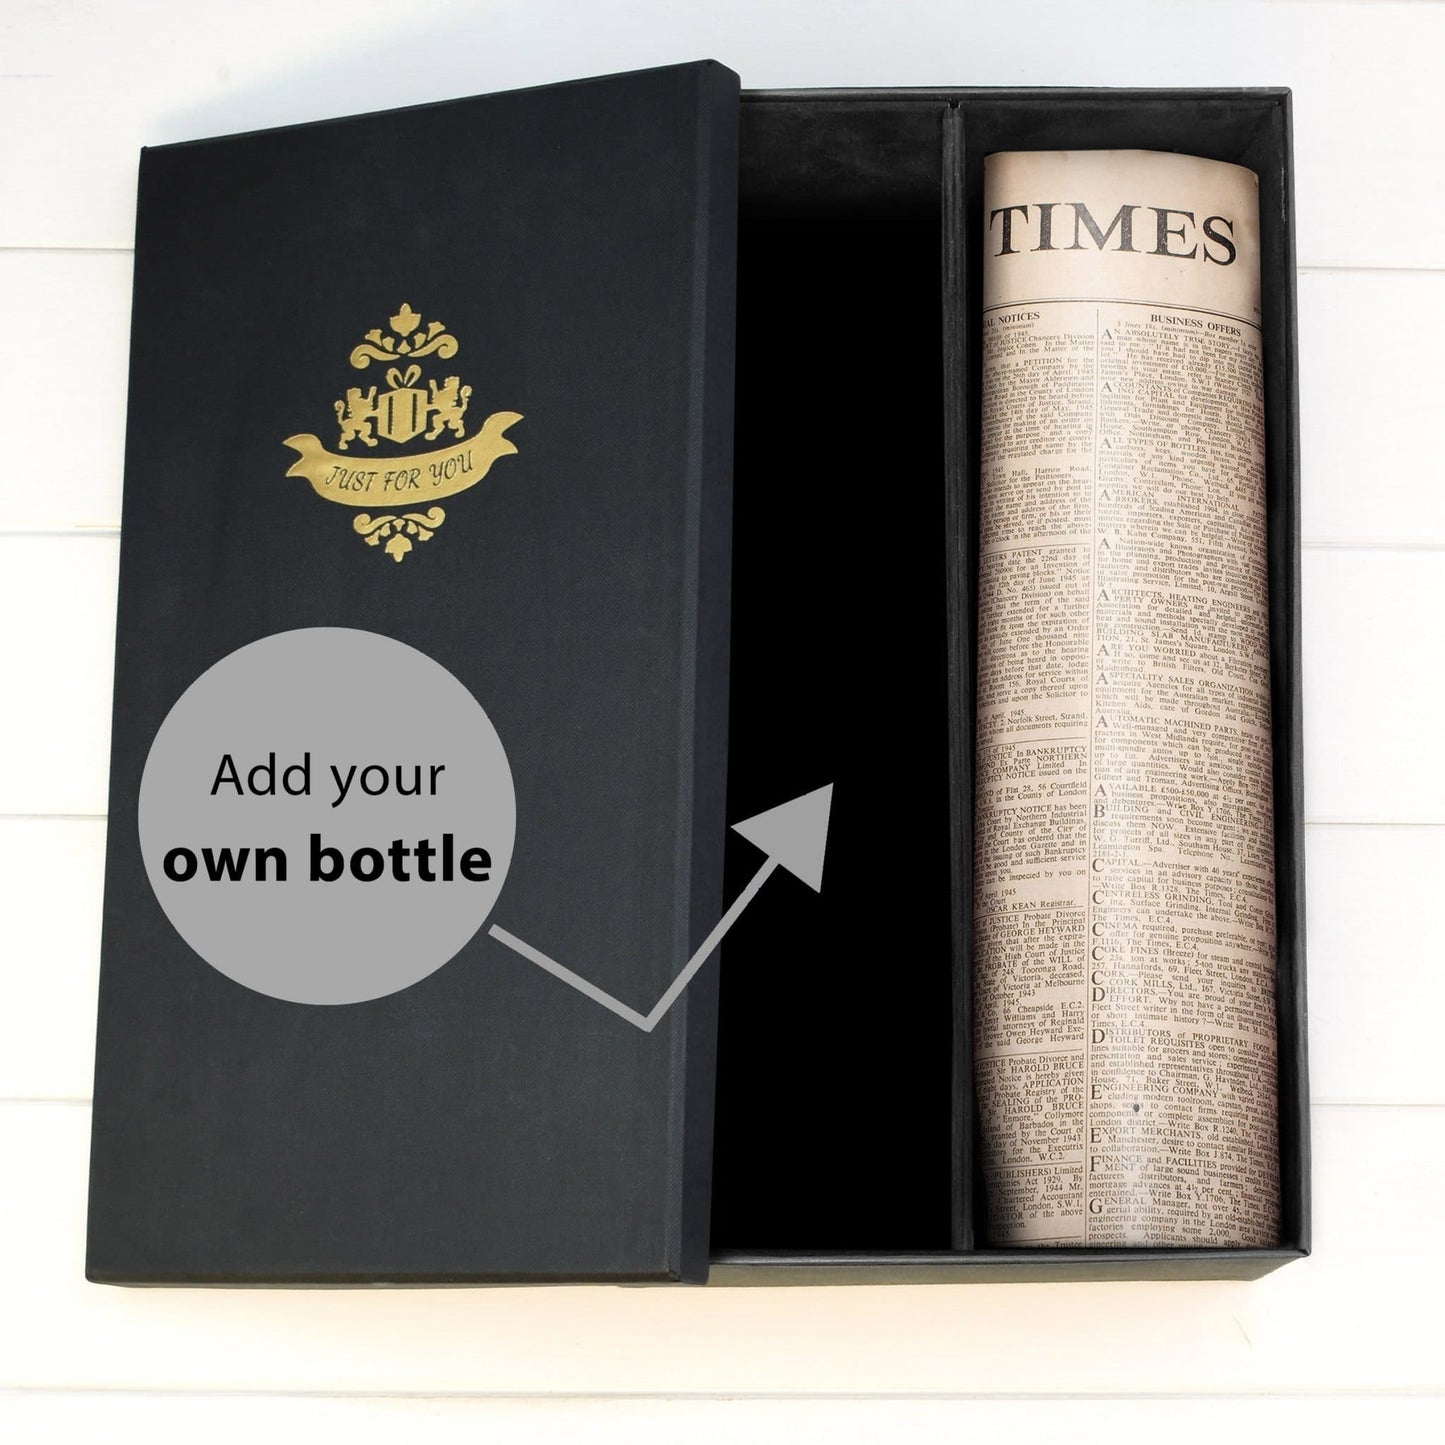 Original Newspaper & ‘Your Choice’ of Alcohol Bottle in Gift Box